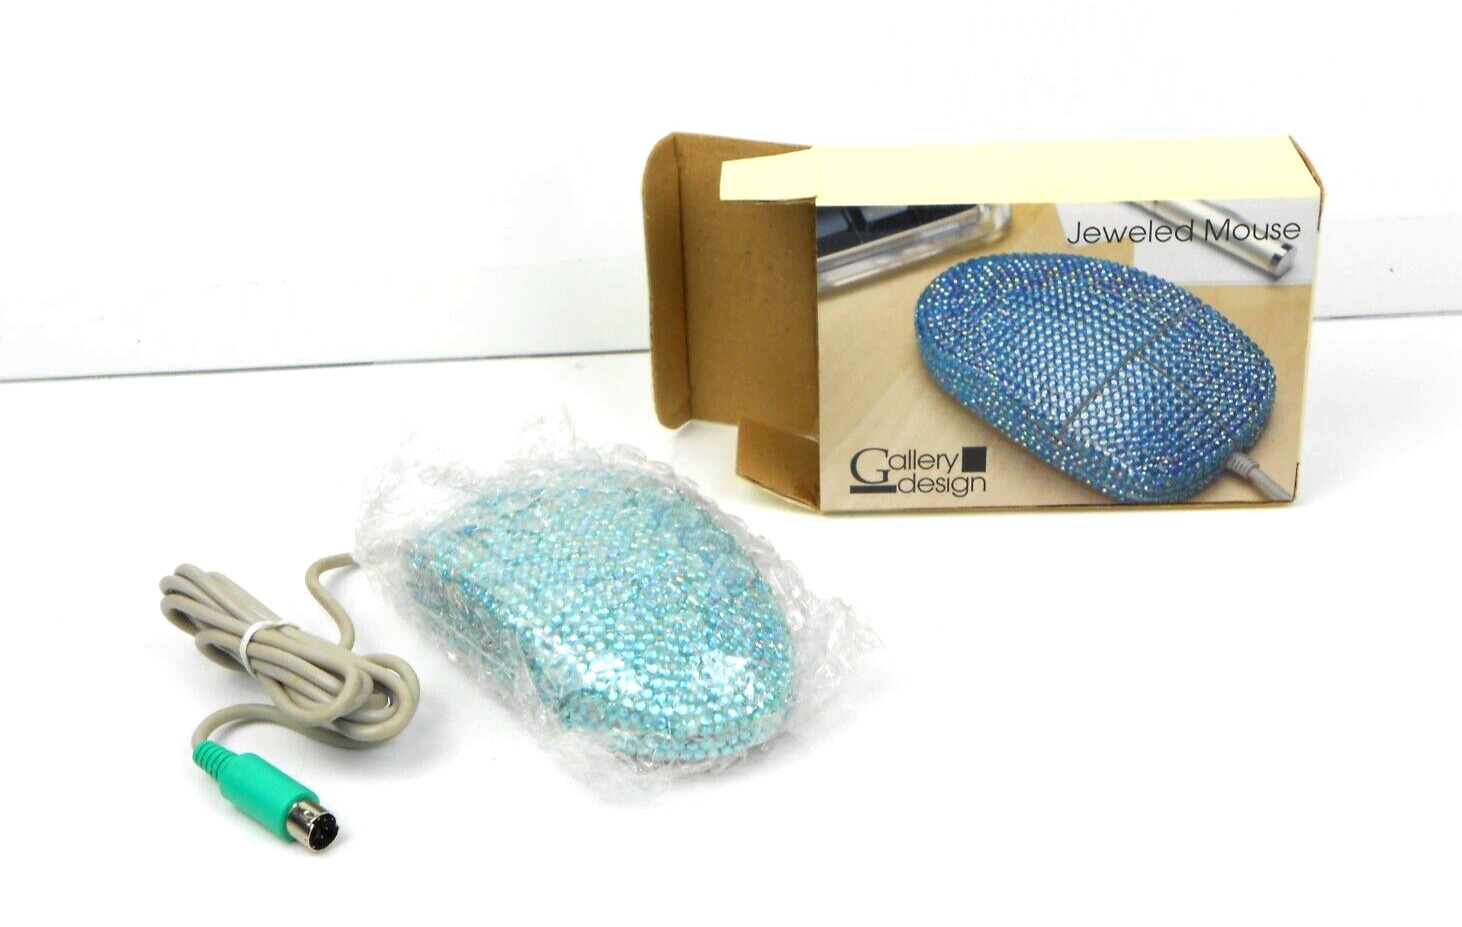 IBM PS/2 Mouse Rhinestone Blue Crystal Jeweled Gallery Design  3 Button NEW